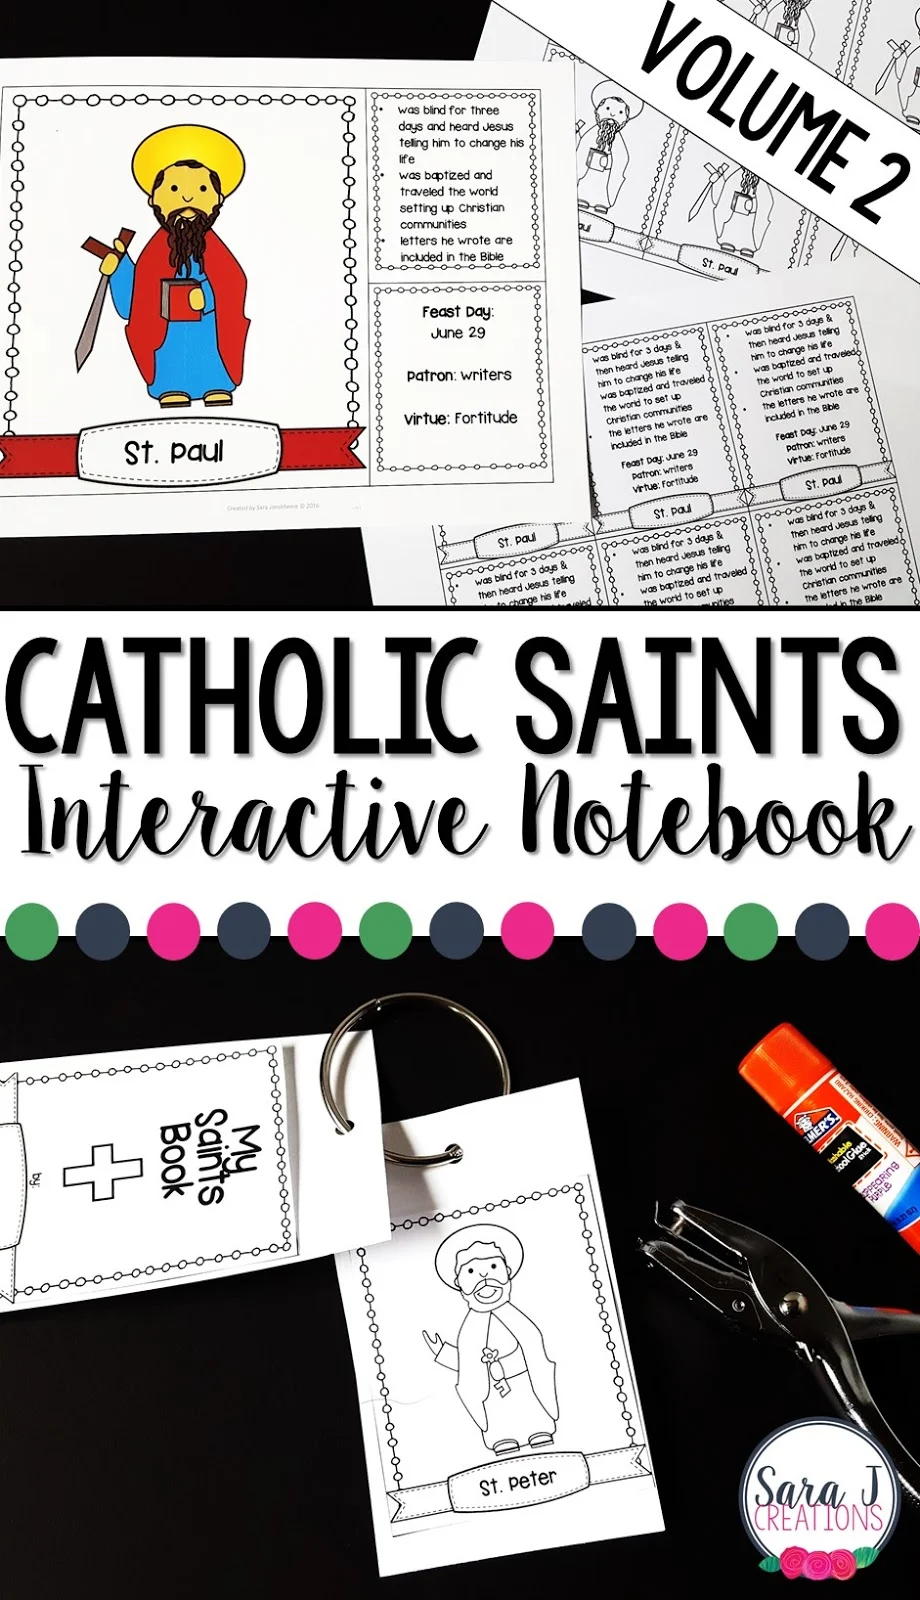 Catholic Saints facts for kids that can be used as an interactive notebook, flip book or flashcards.  Includes 25 beloved saints.